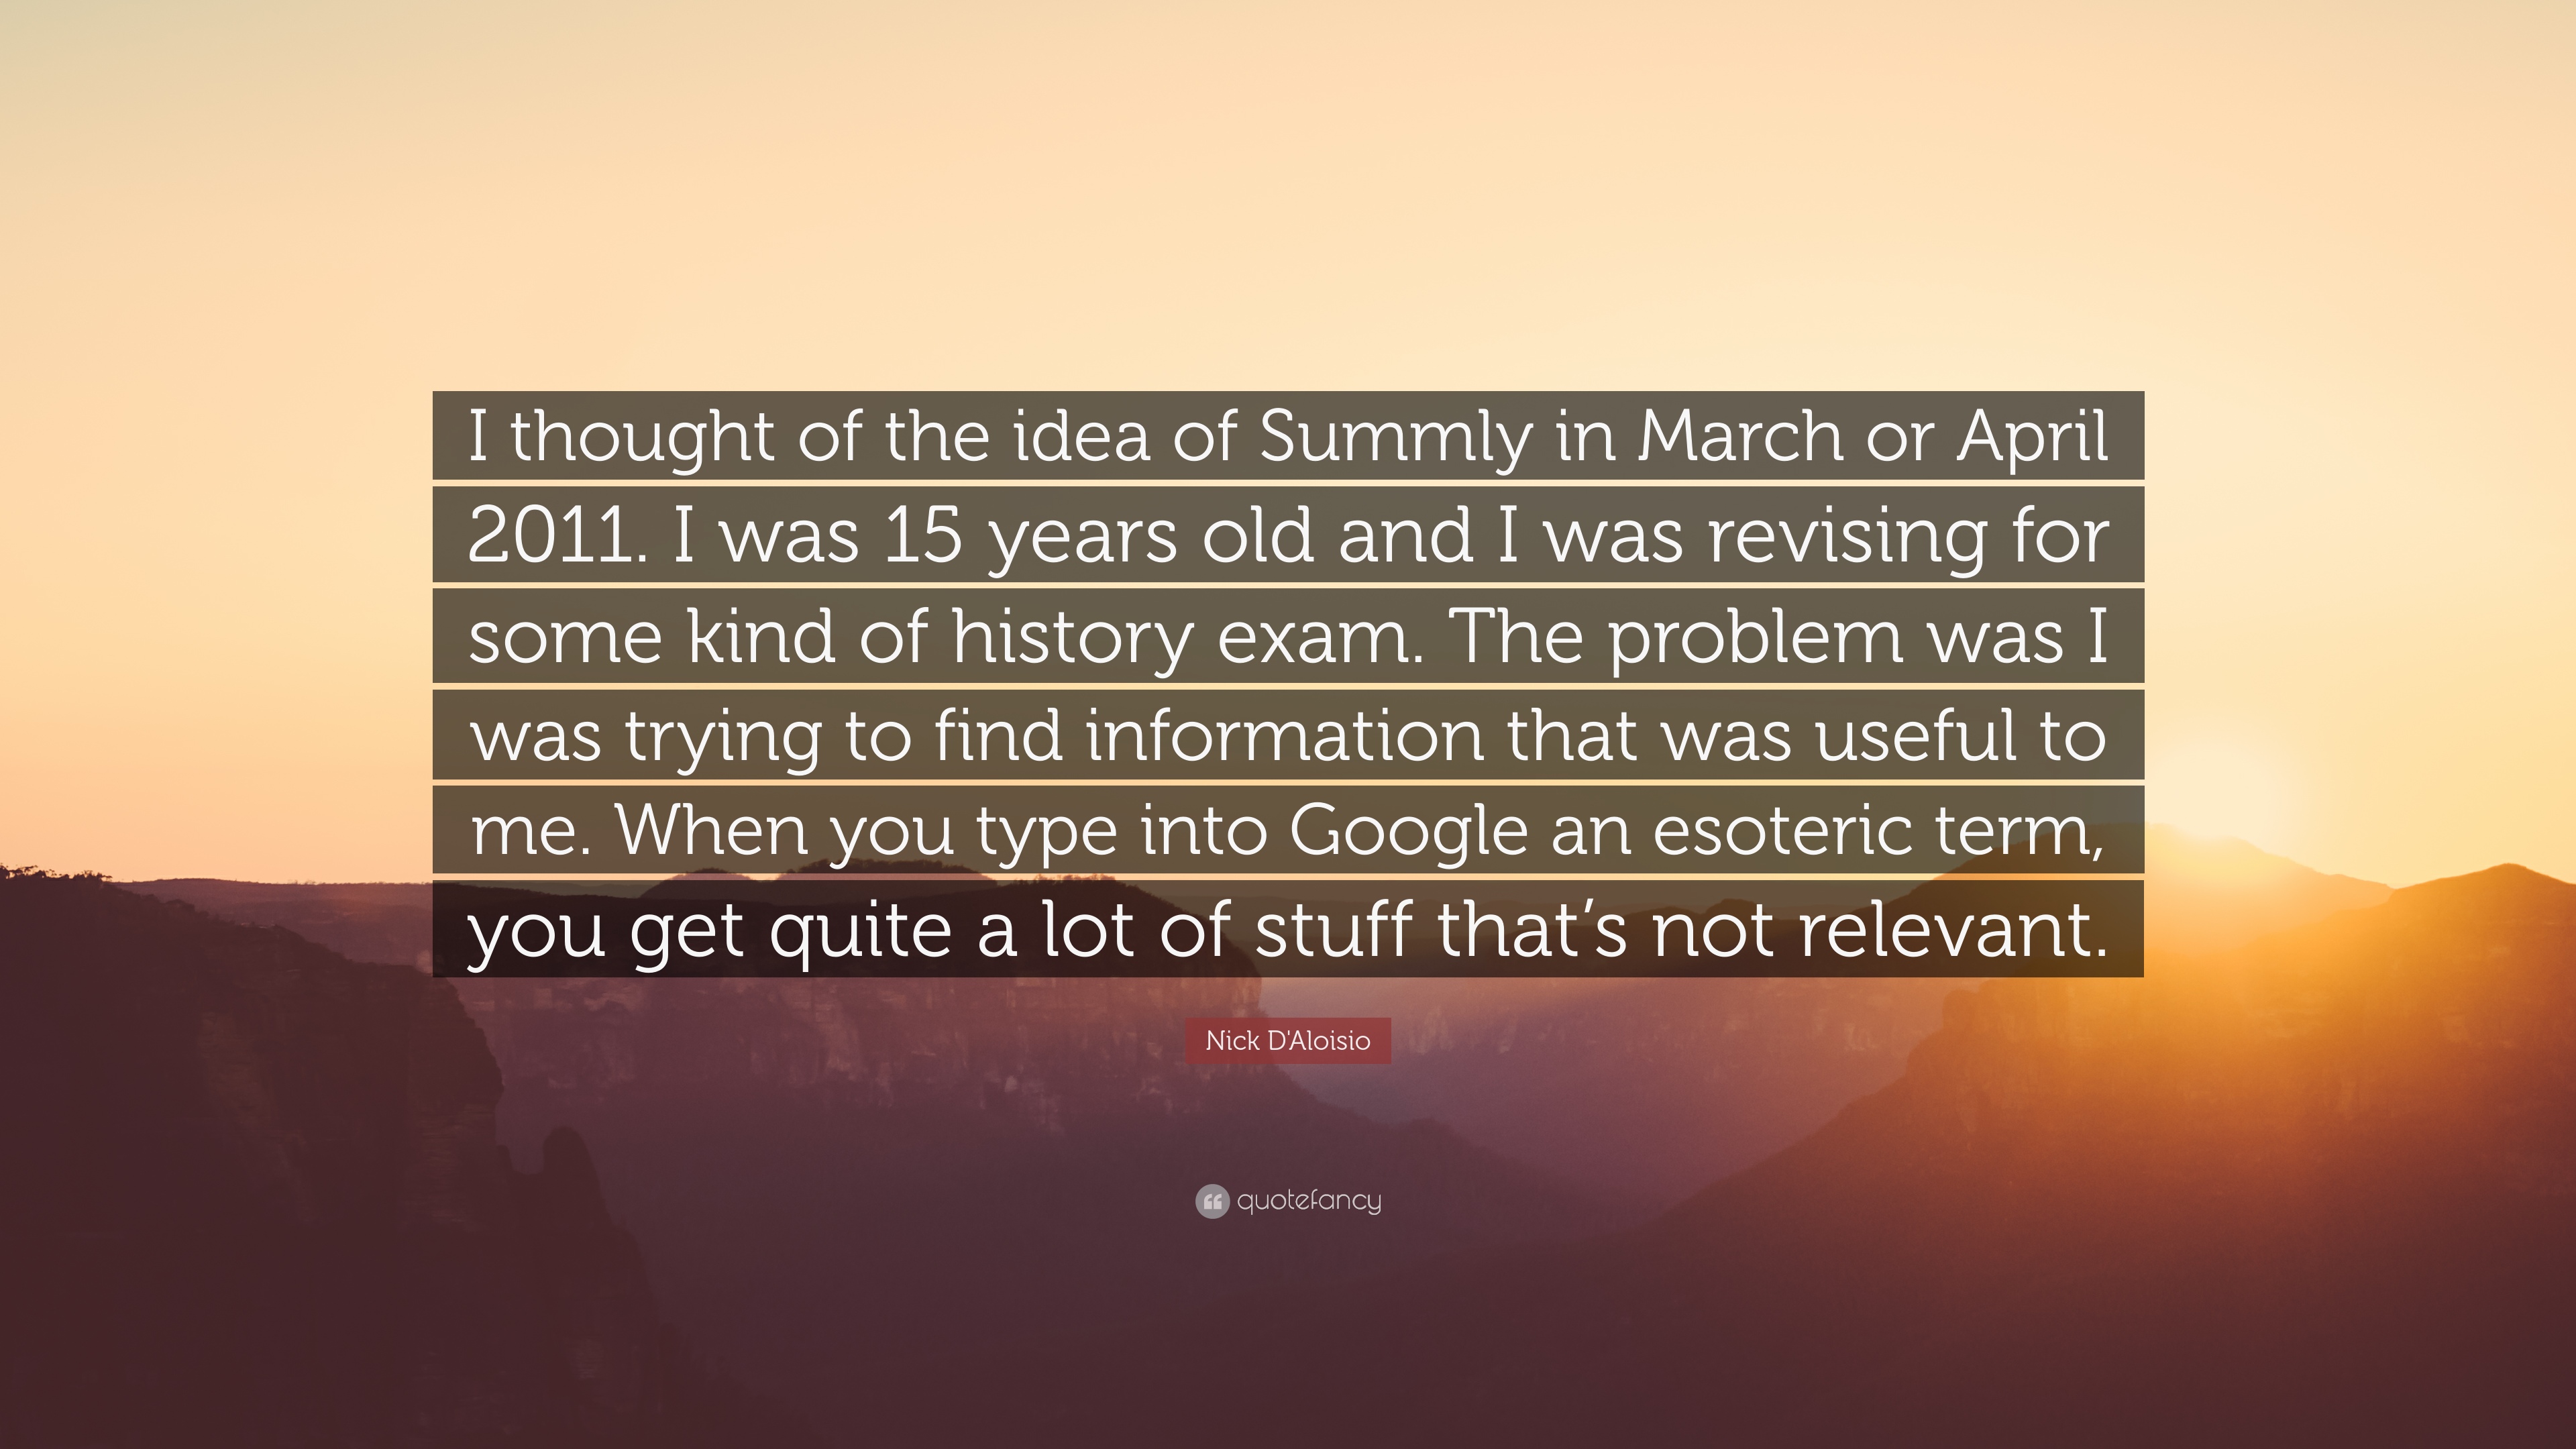 Nick D'Aloisio Quote: “I thought of the idea of Summly in March or